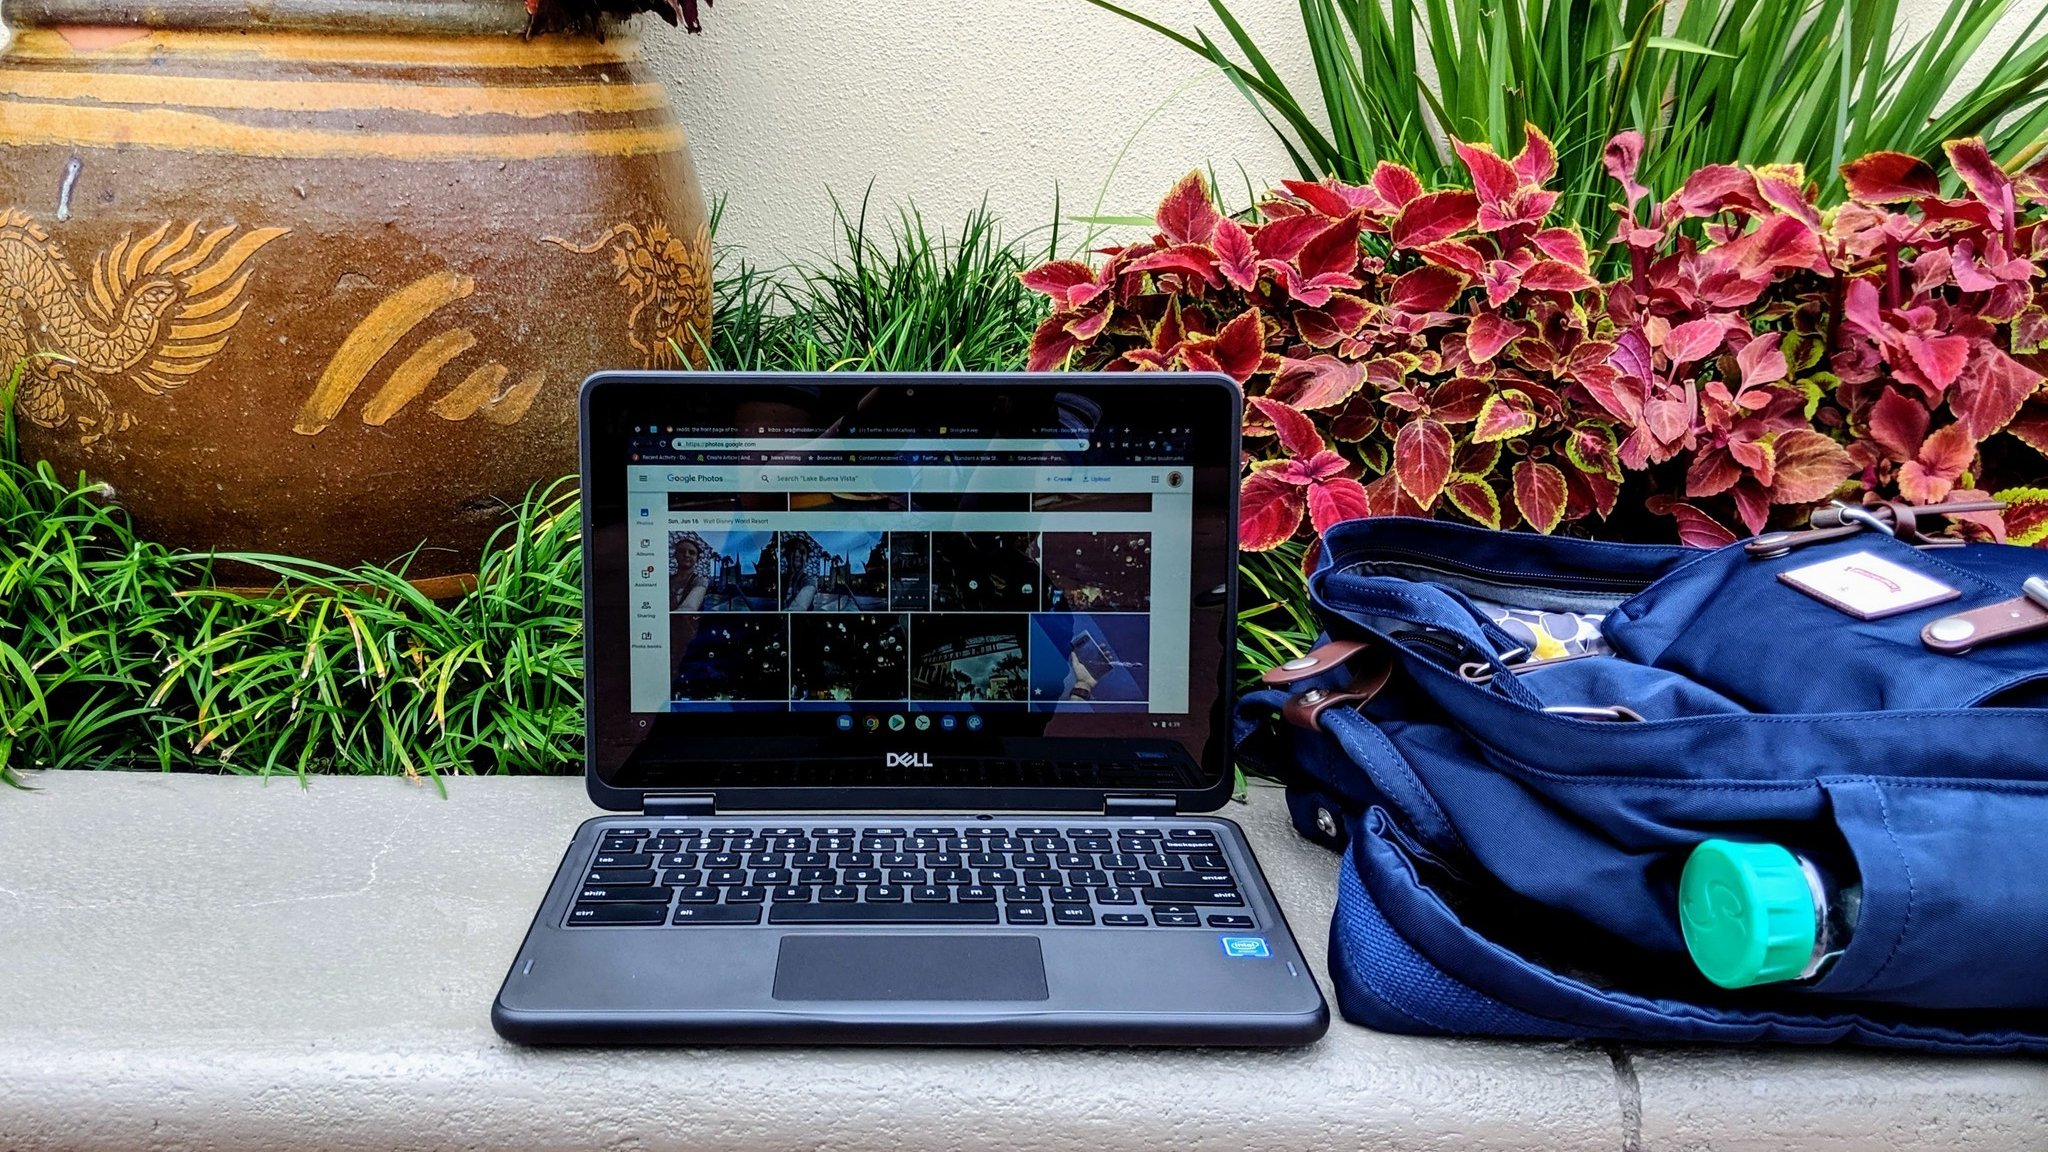 Dell Chromebook 3100 2 In 1 Review China Bench Planter